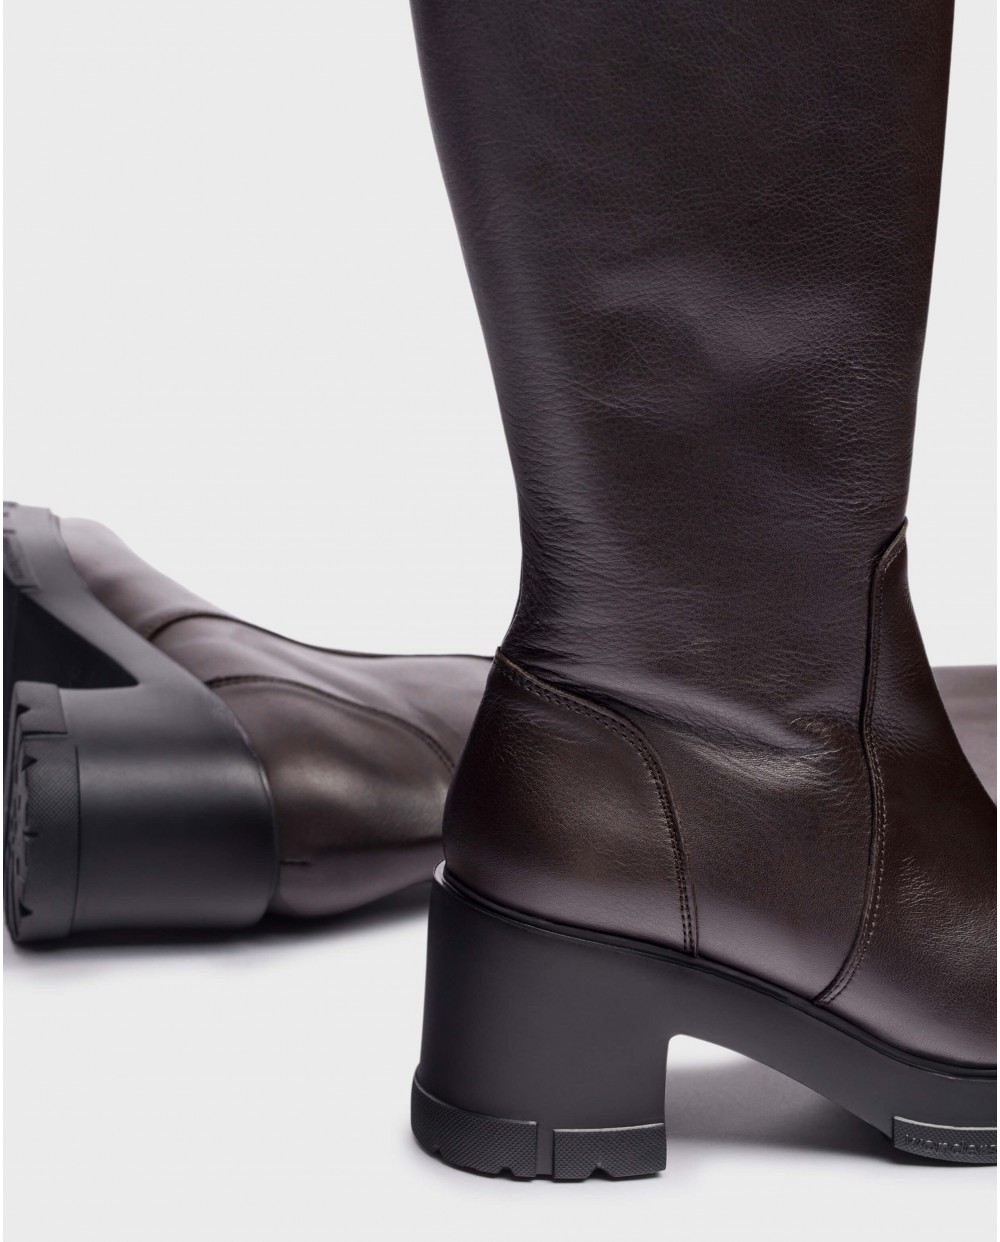 Black leather boot with track sole